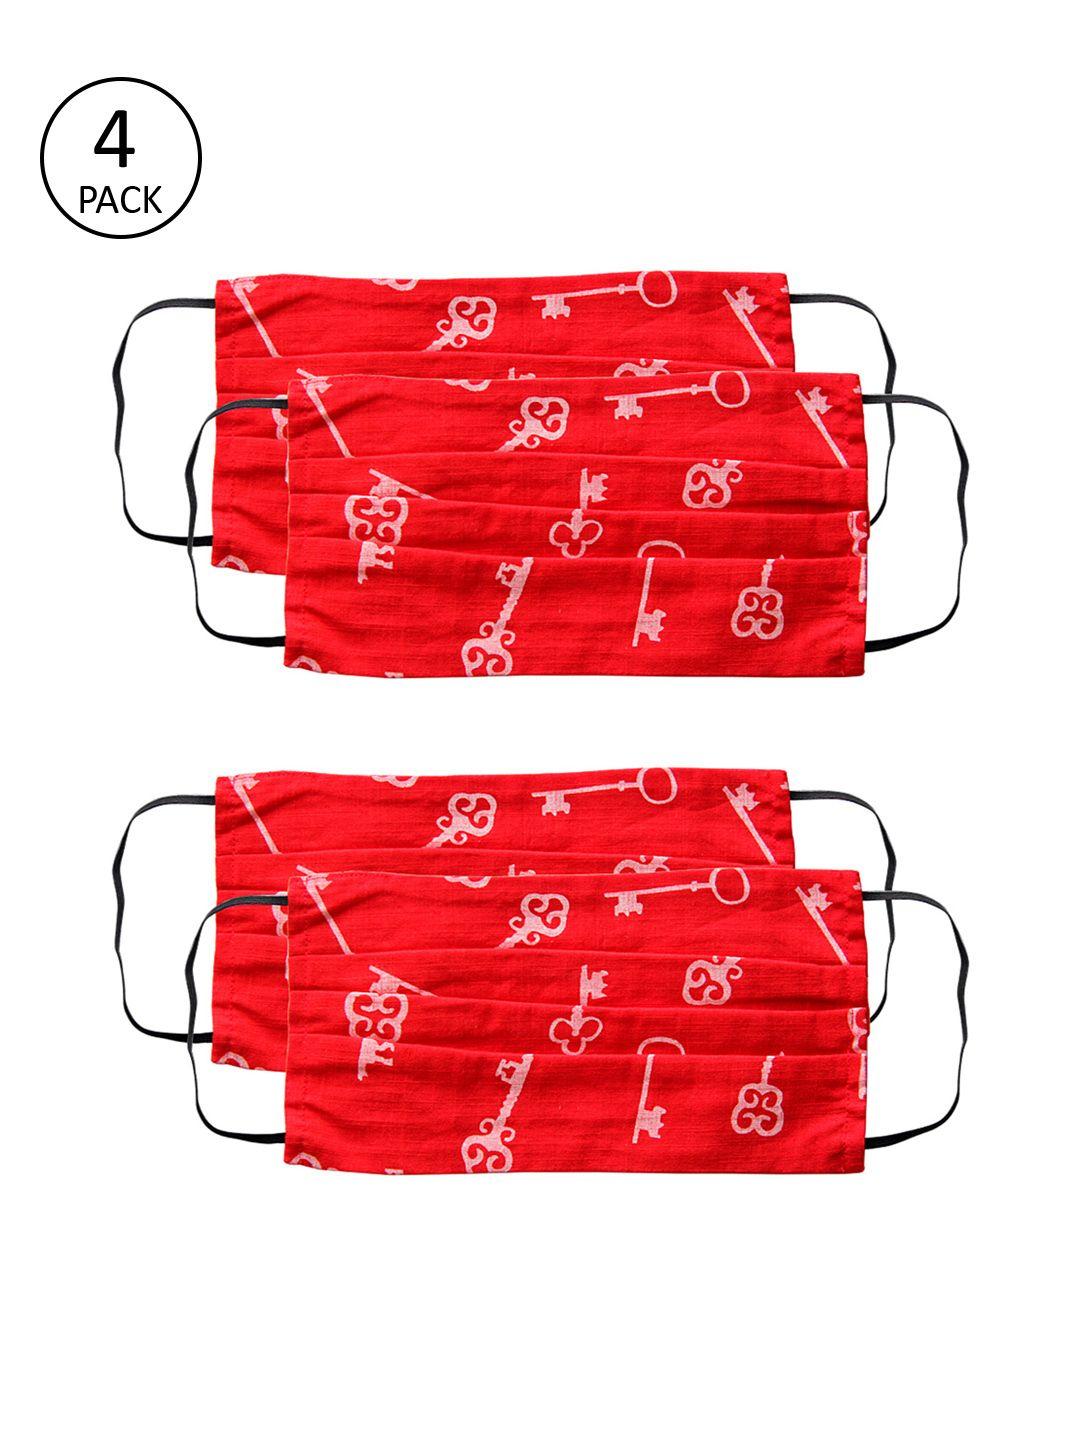 voylla unisex red & white printed 4 pcs 2 ply reusable outdoor fabric masks